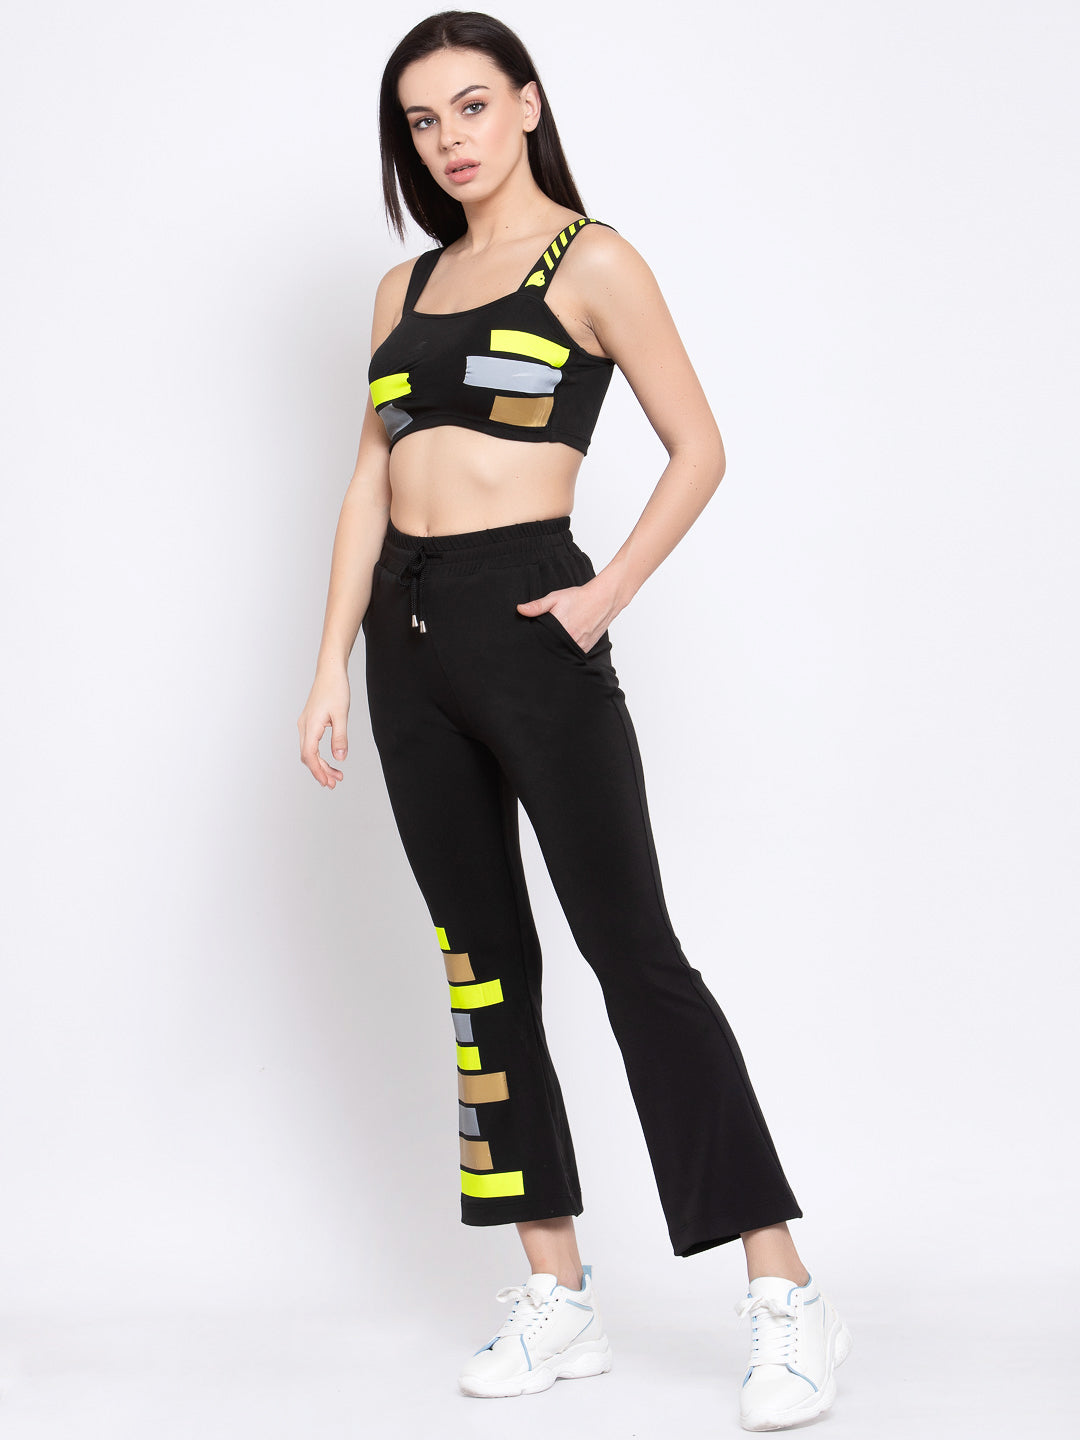 Black co-ord athleisure wear by Just Billi